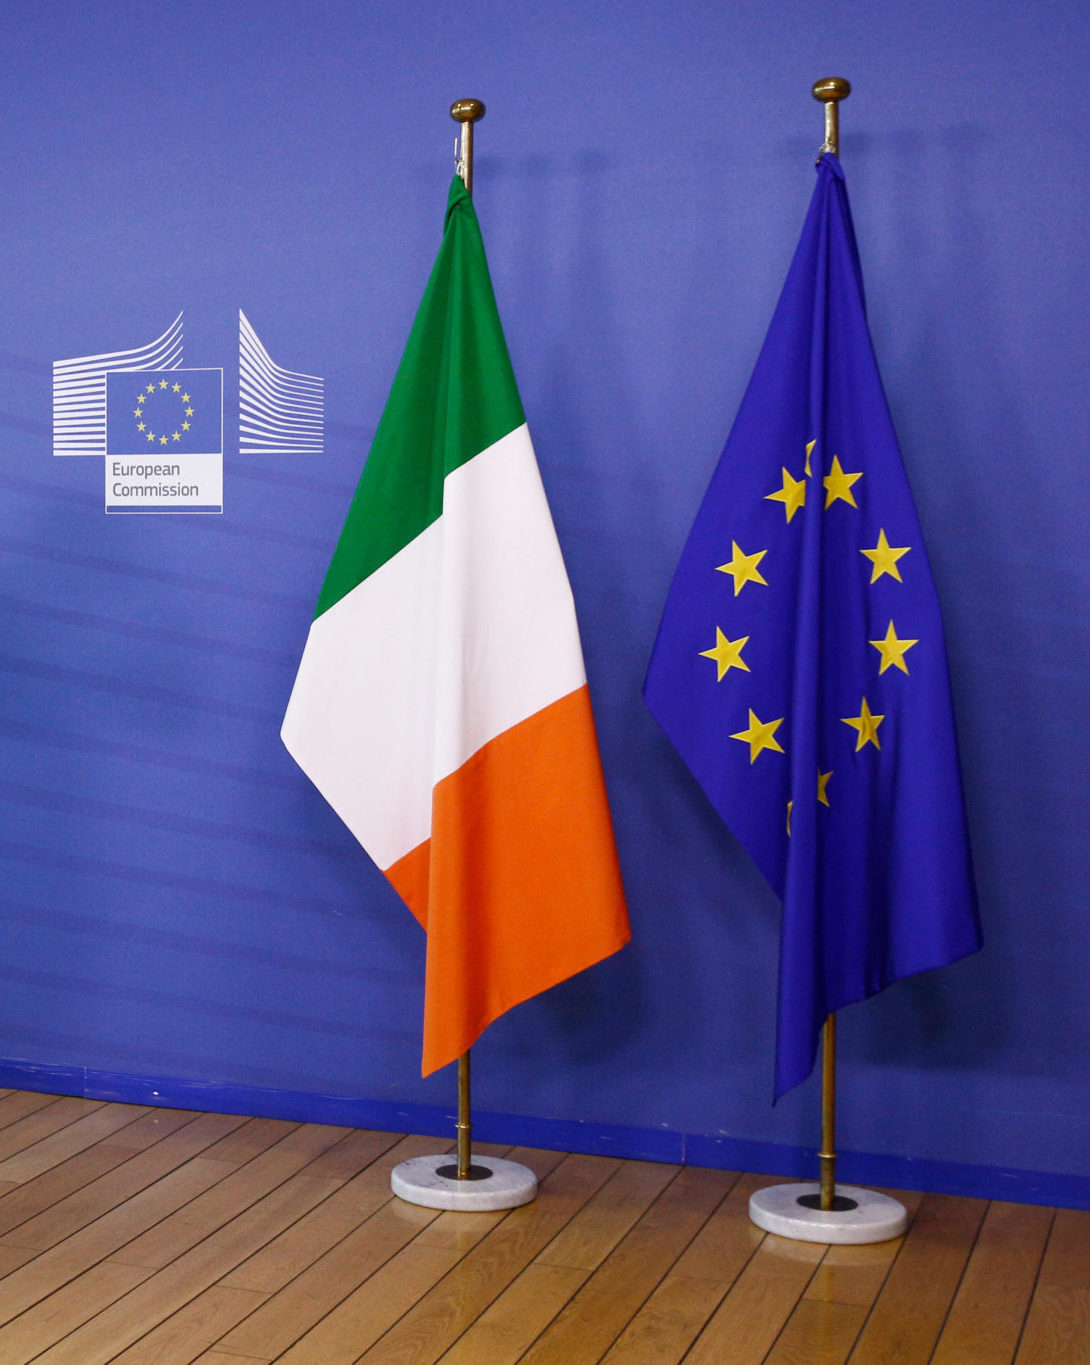 The Irish Tricolour and flag of the European Union are seen in Brussels, Belgium in October 2018.